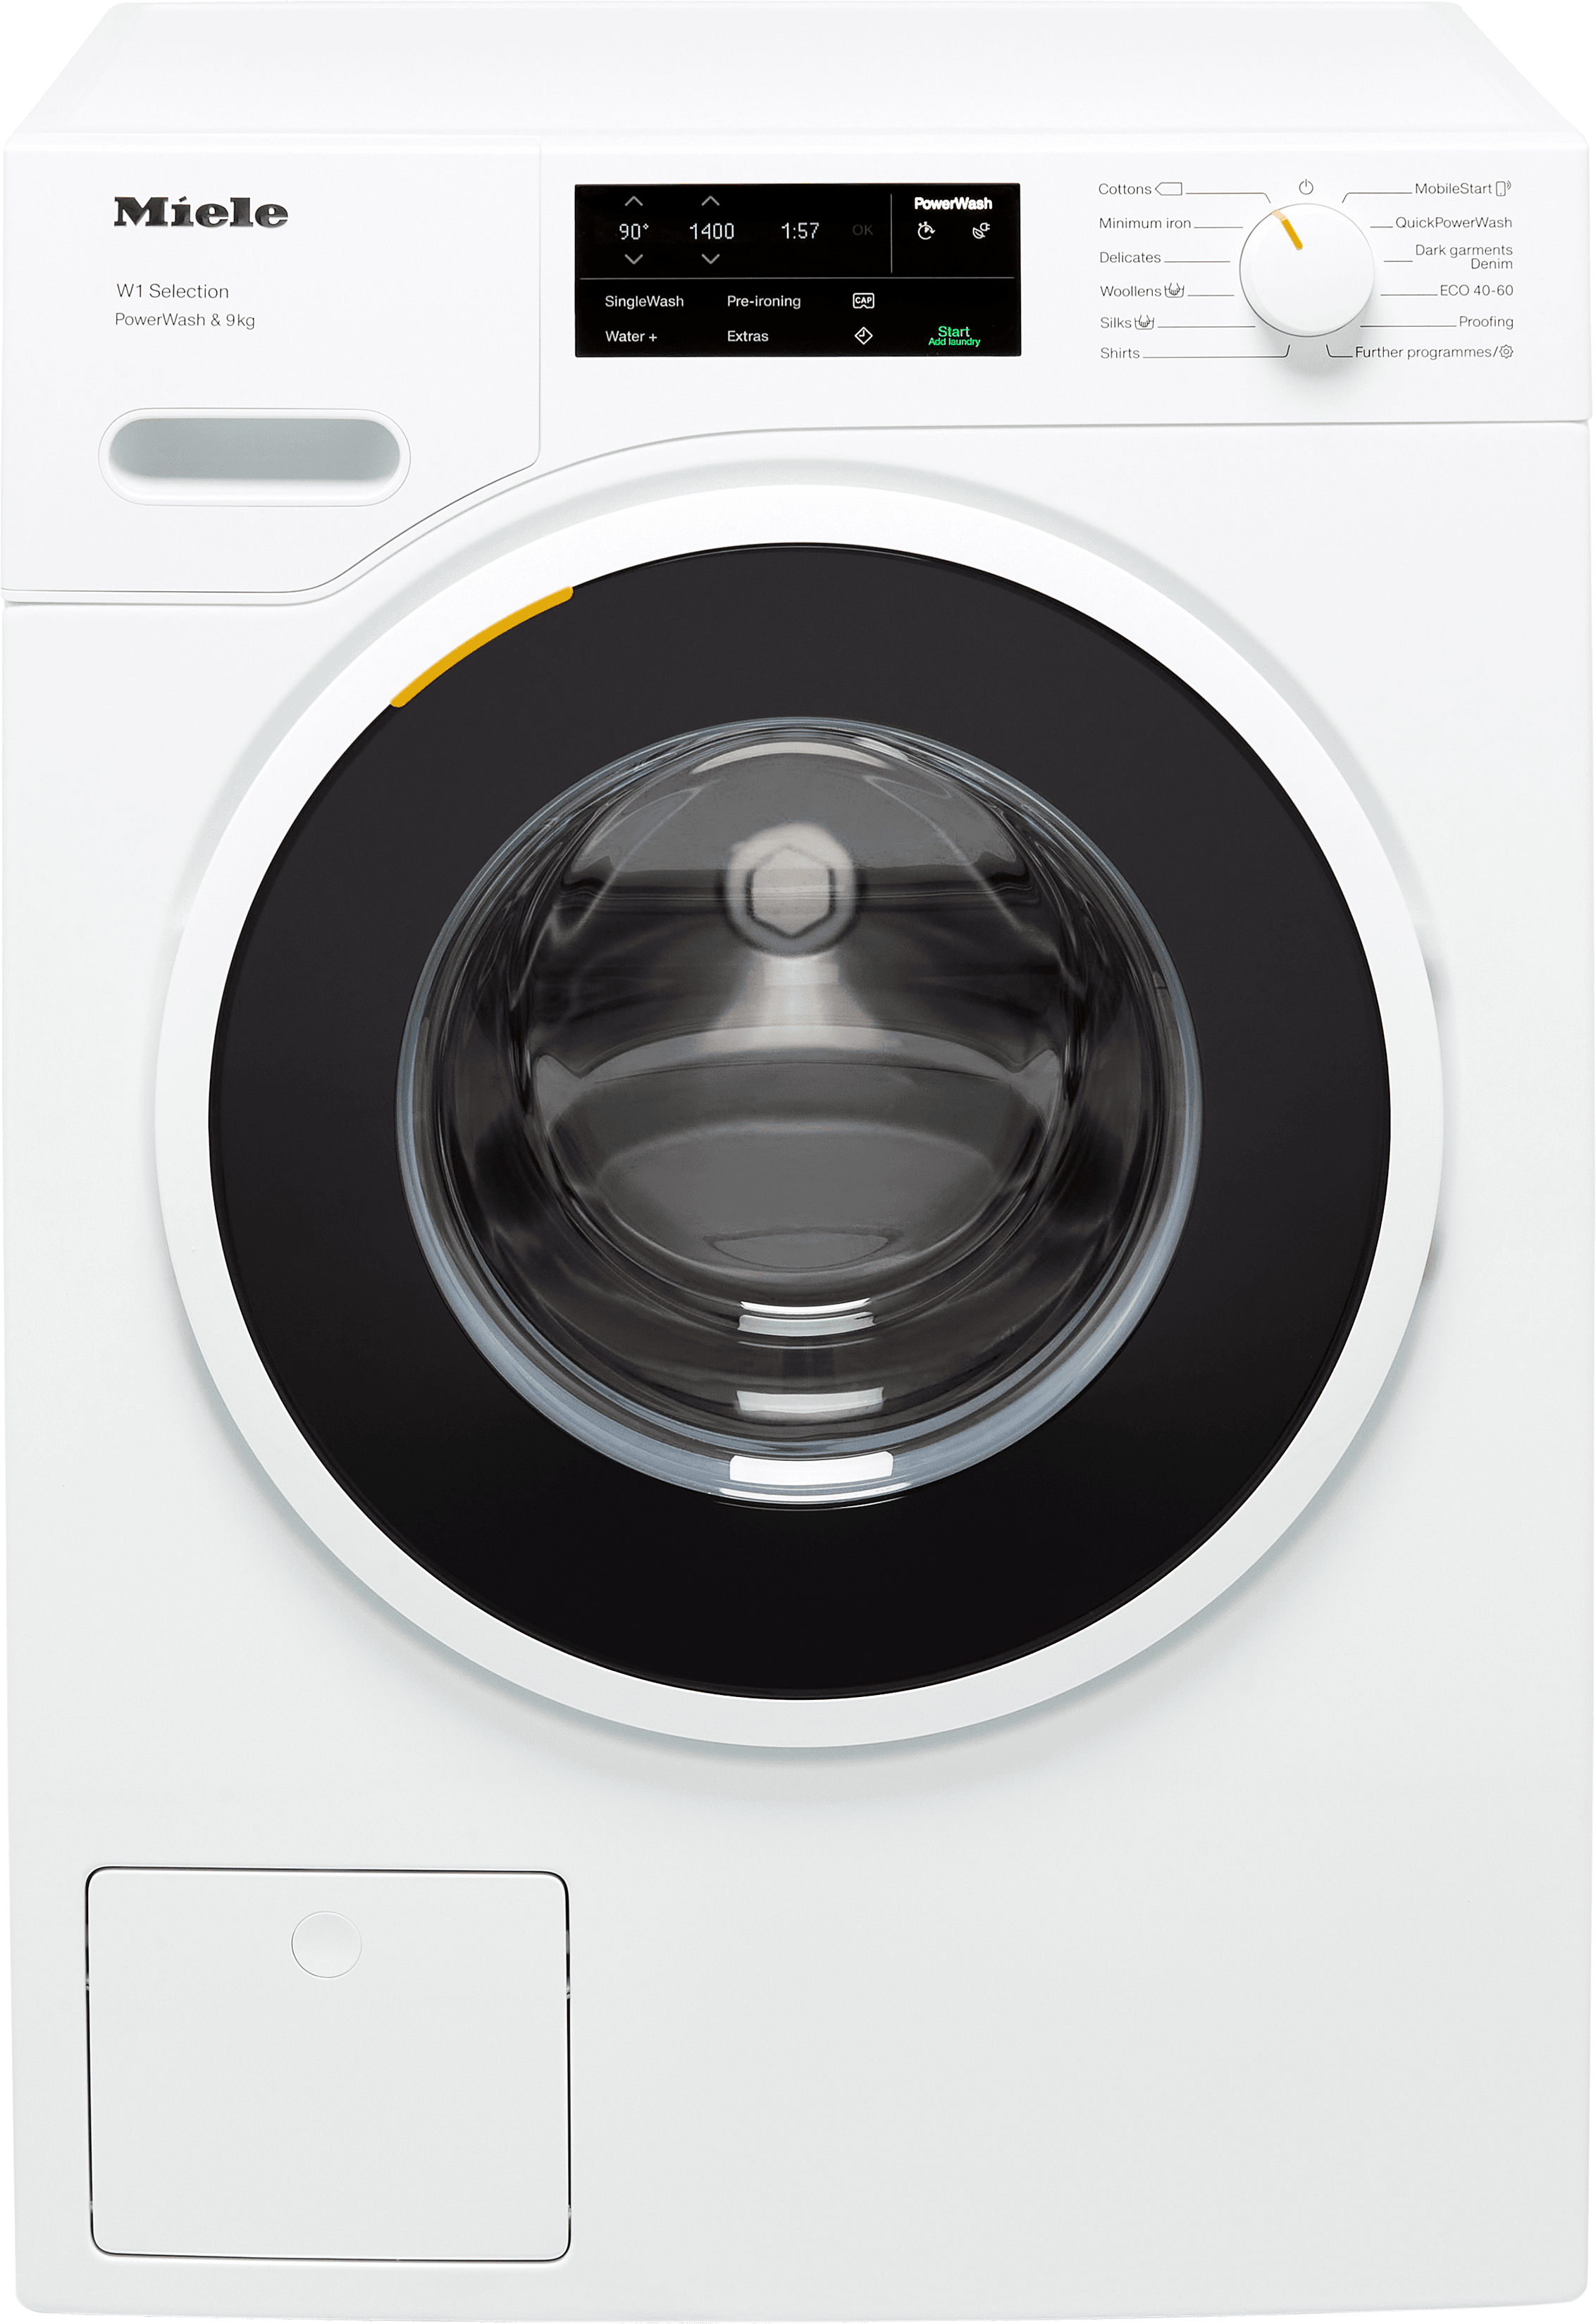 Miele W1 WSG363 9kg Washing Machine with 1400 rpm - White - A Rated White